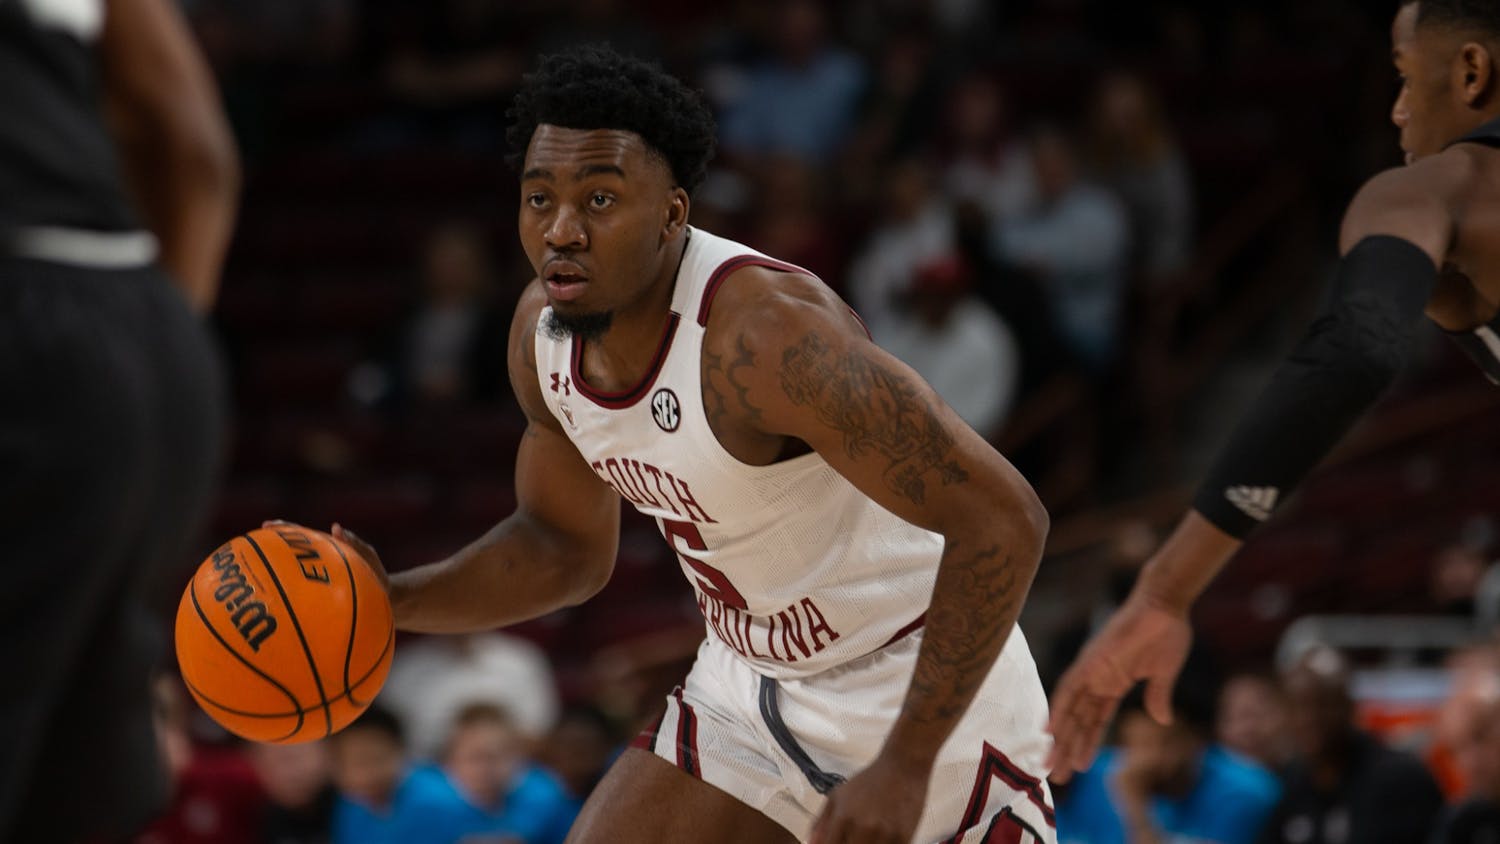 The Gamecocks defeated the Bulldogs 66-56.&nbsp;